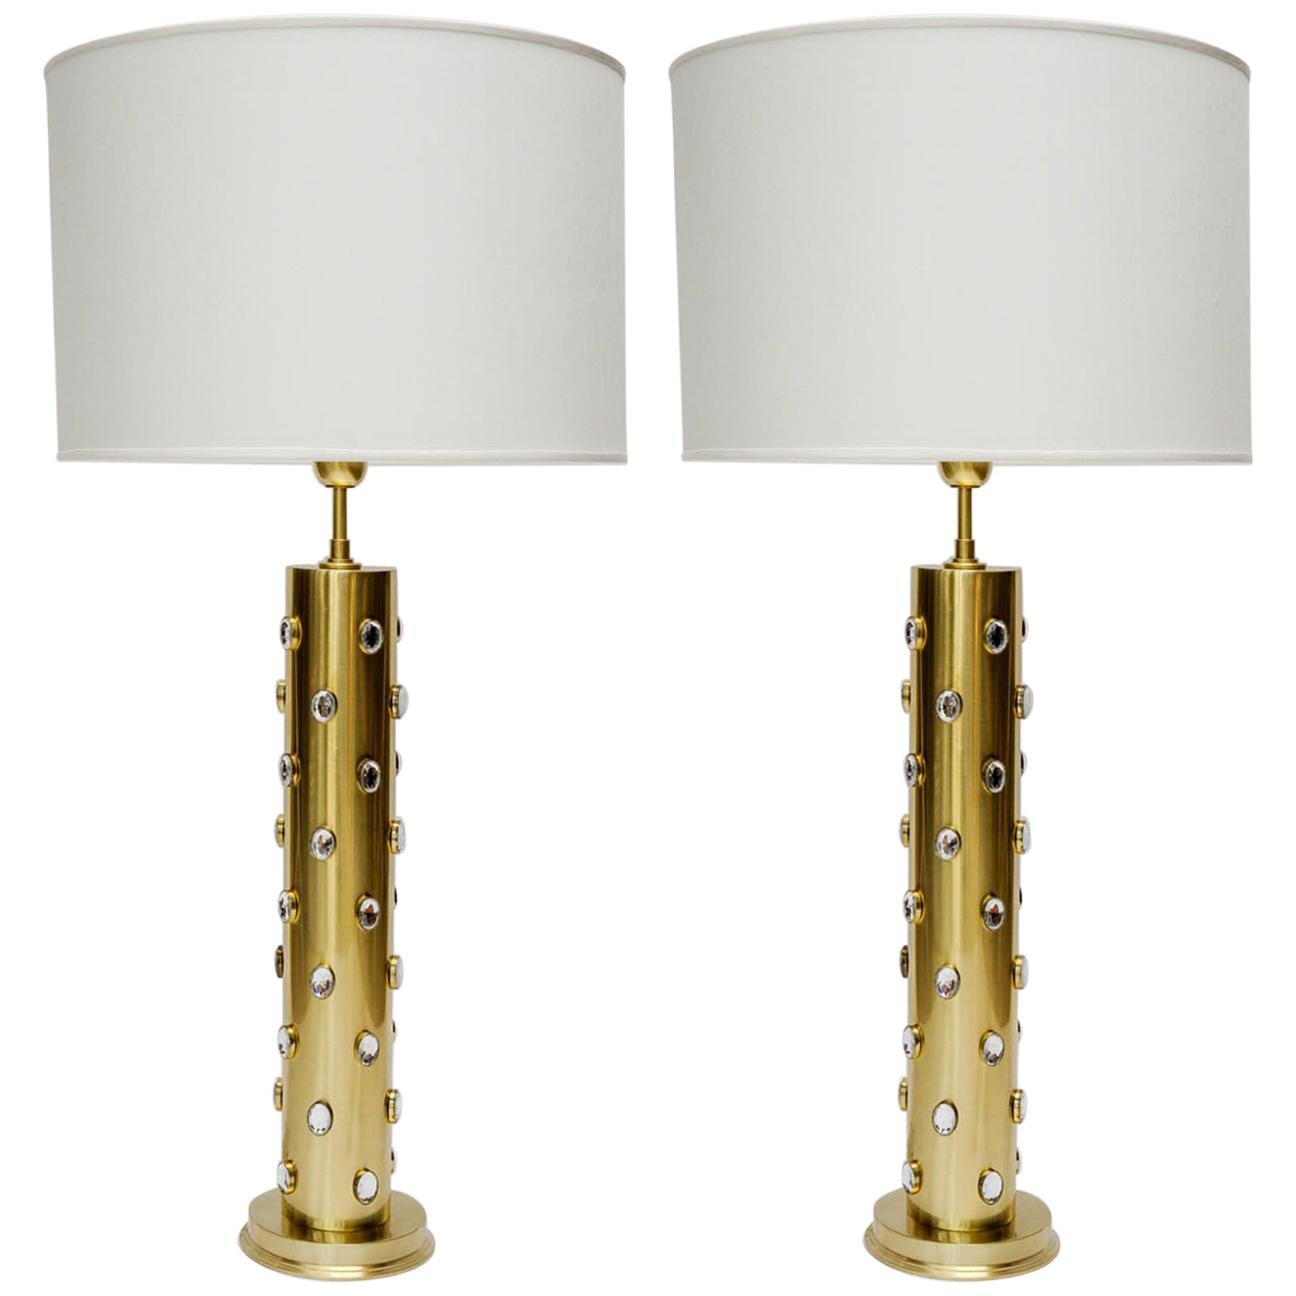 Pair of Tall Brass Table Lamps with Glass Sparkles